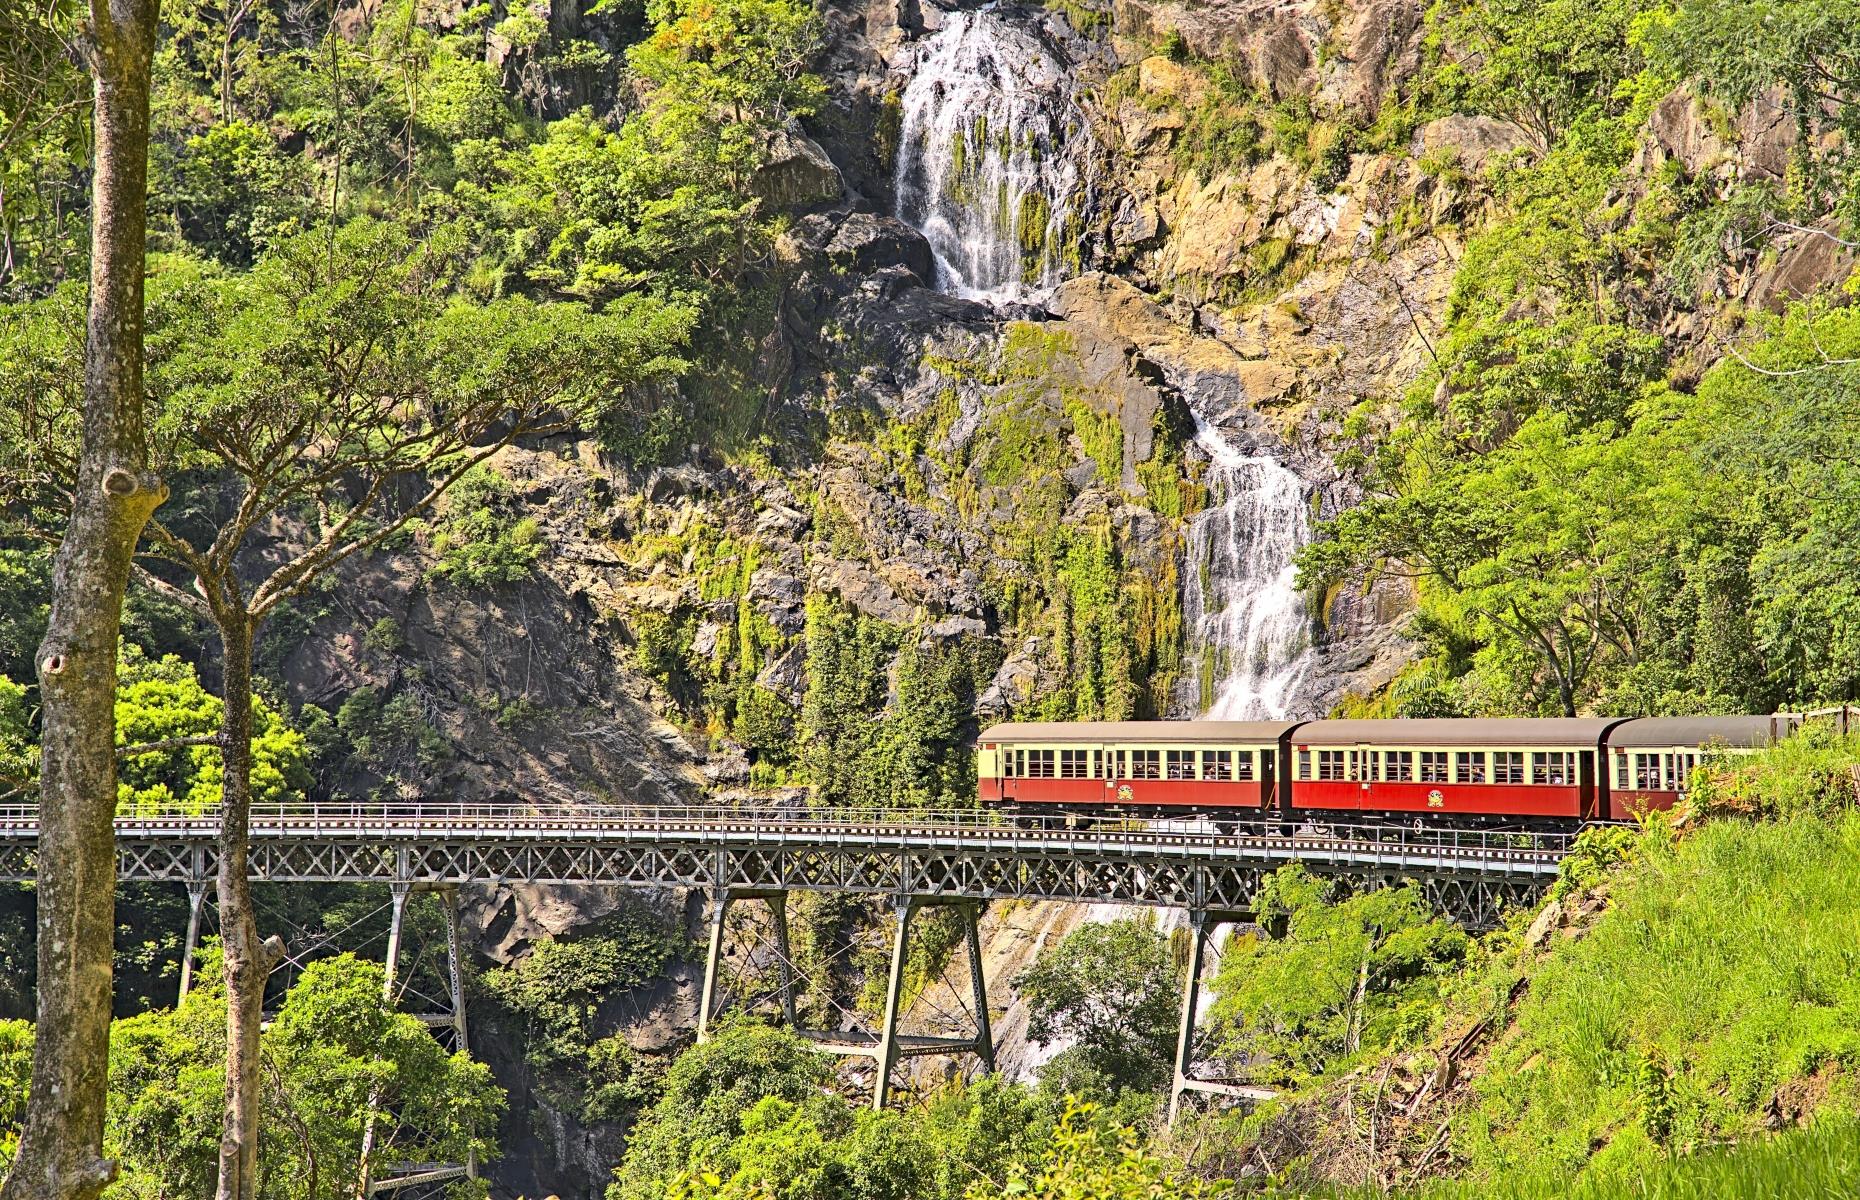 Slow and relaxing, train travel is one of the best ways of getting around if you have the time to spare. Some of the most breathtaking views in the world can be enjoyed from behind a train window and you don't necessarily have to shell out the big bucks for an epic ride. Here we take a look at the world's most scenic train journeys that you won't have to splash out on.